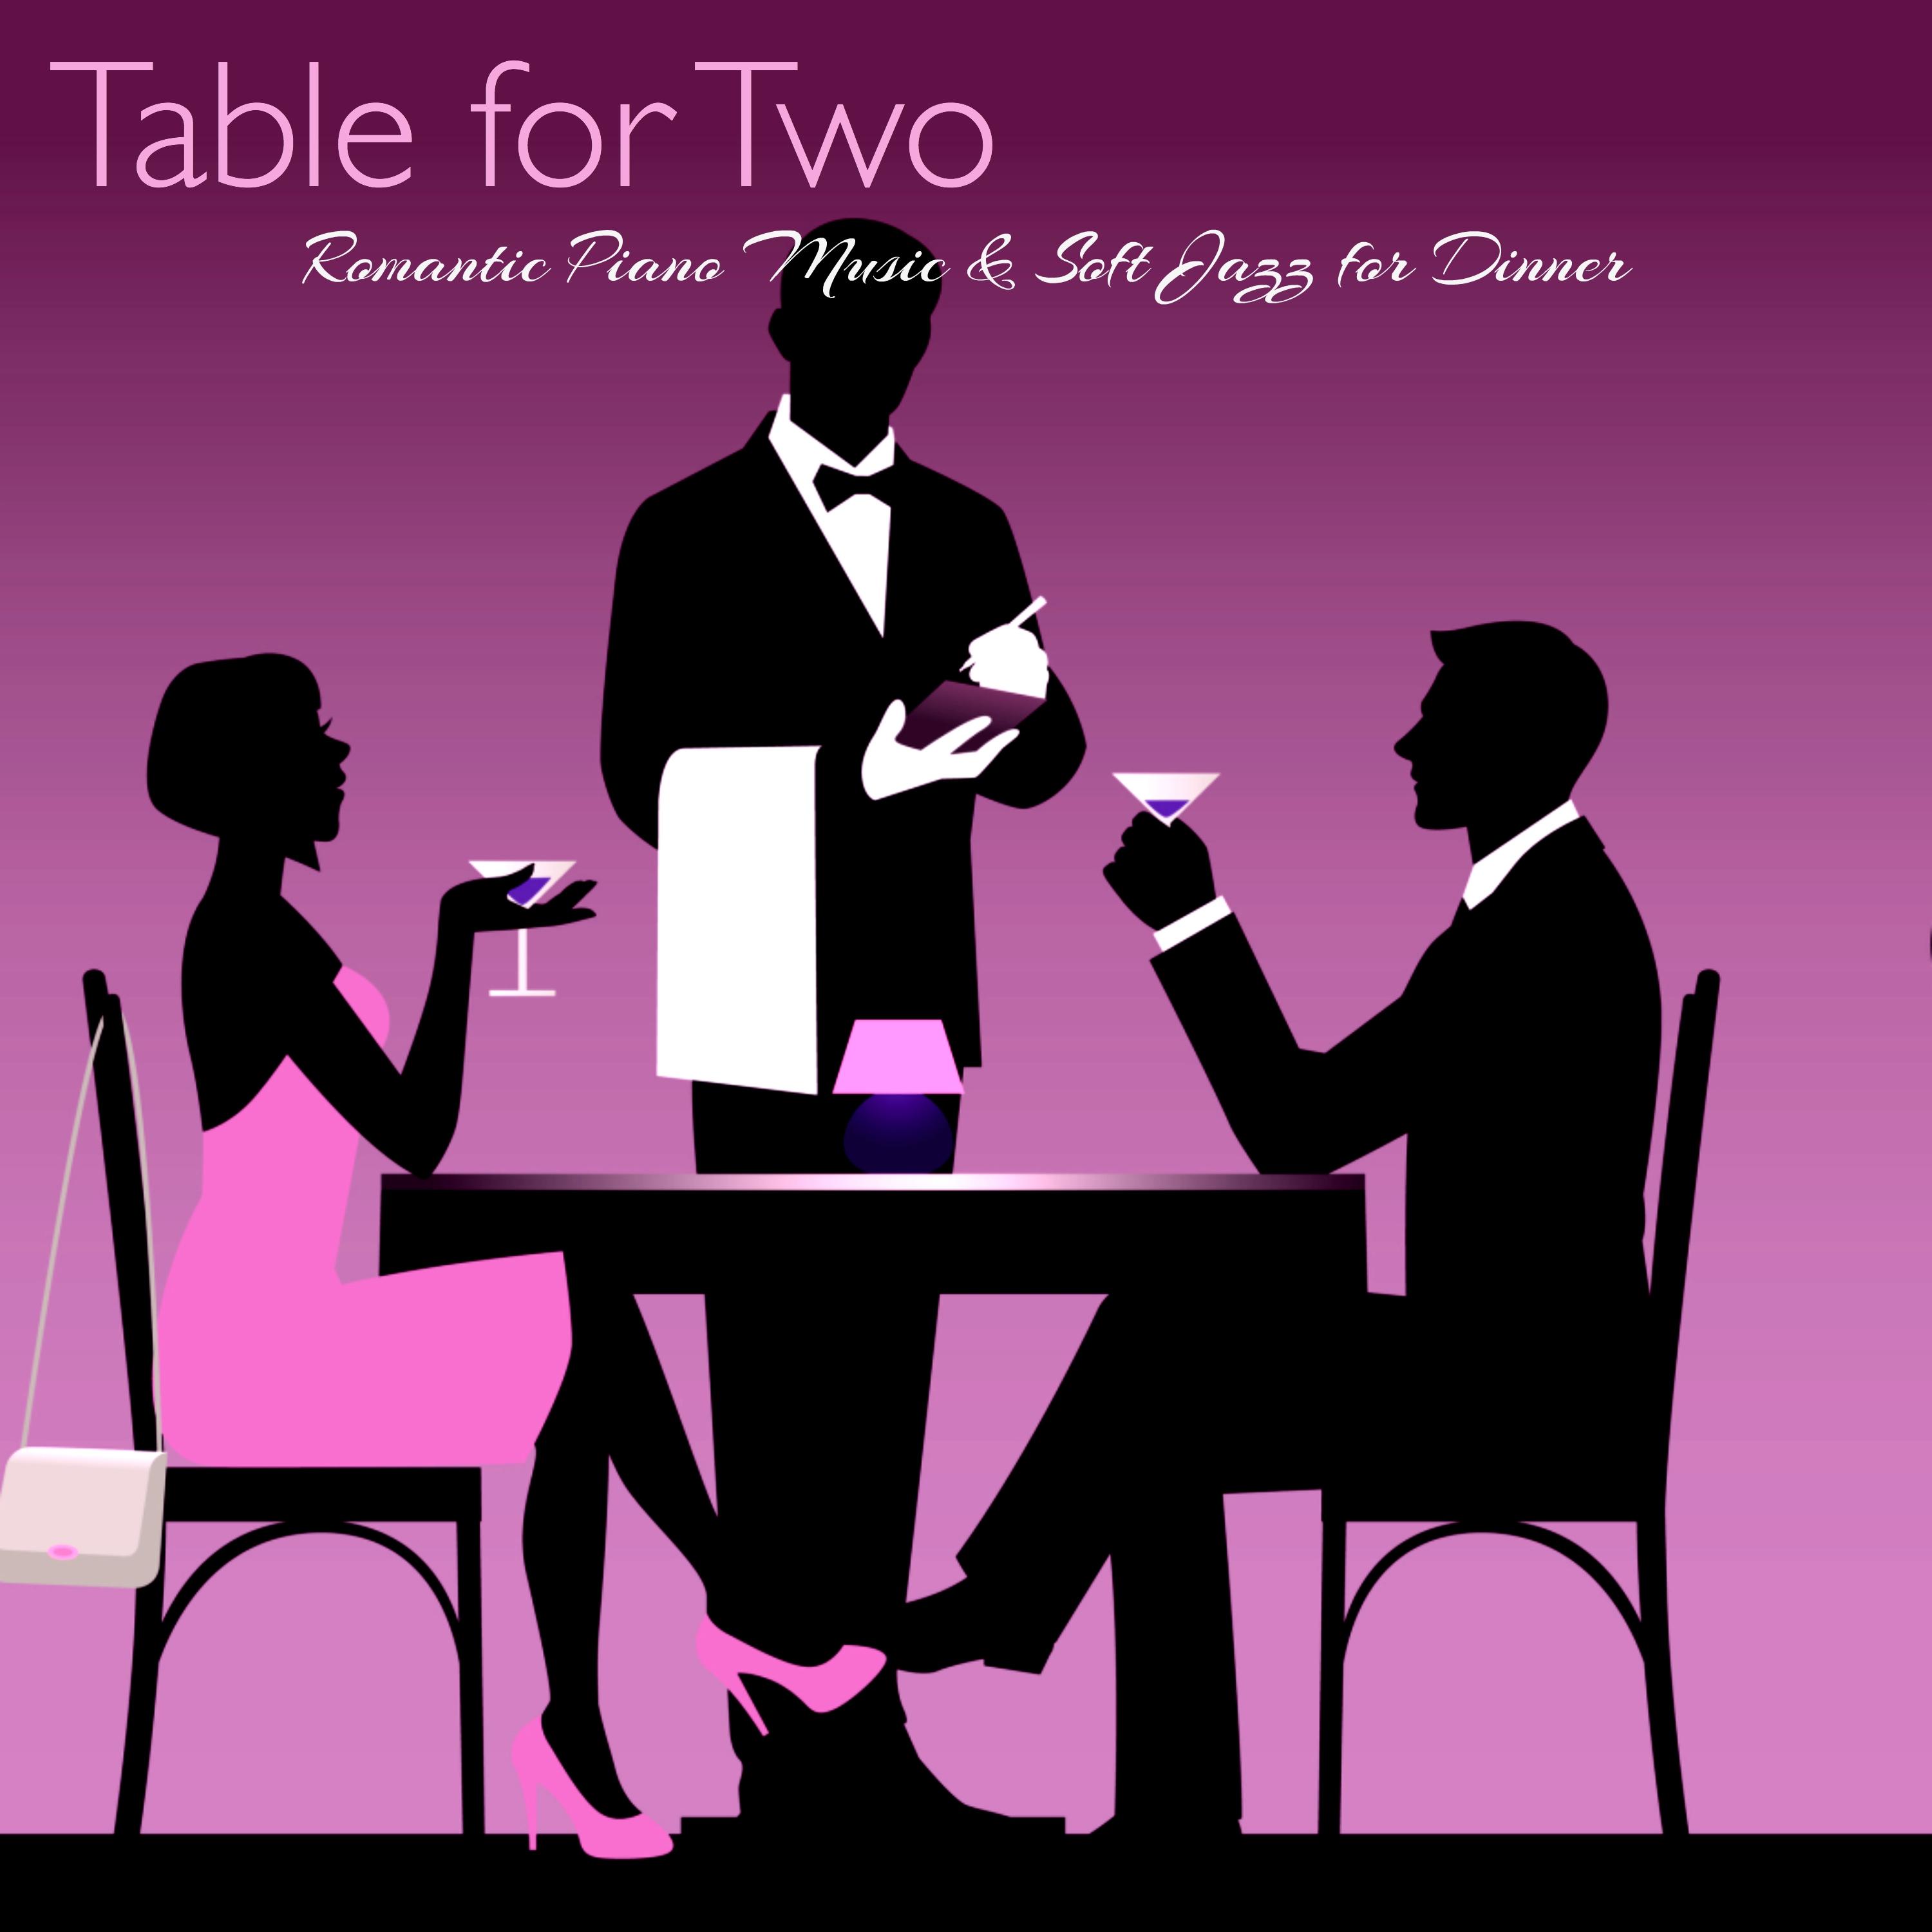 Table for Two  Romantic Piano Music  Soft Jazz for Dinner, Instrumental Background Restautant Music, Cocktails  Piano Bar Romantic Nights